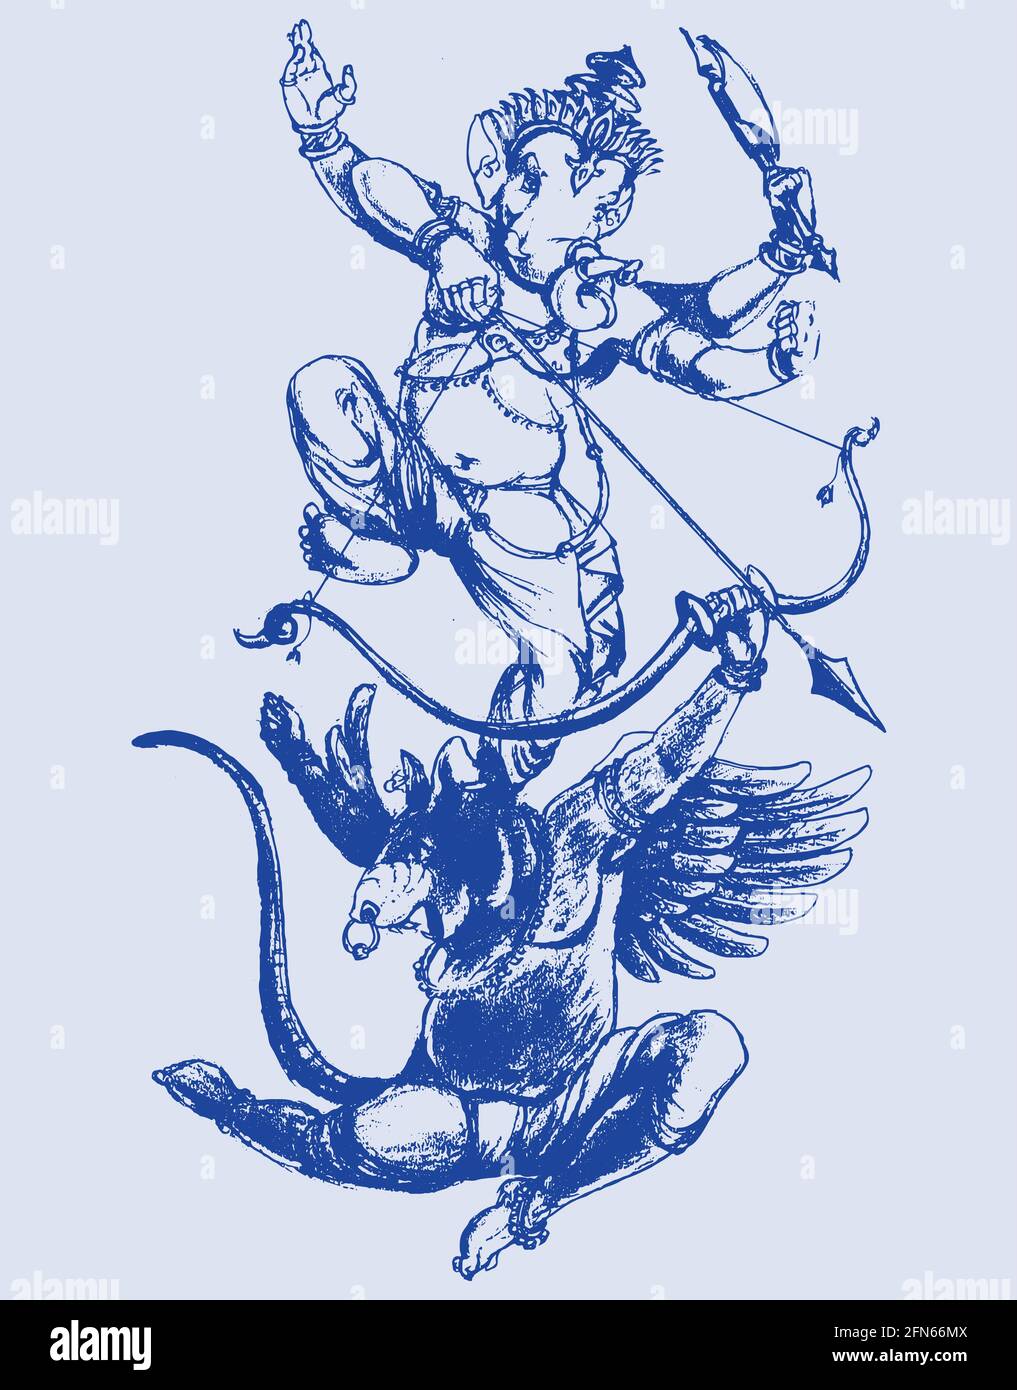 Image Of Ganpati For Drawing - ClipArt Best